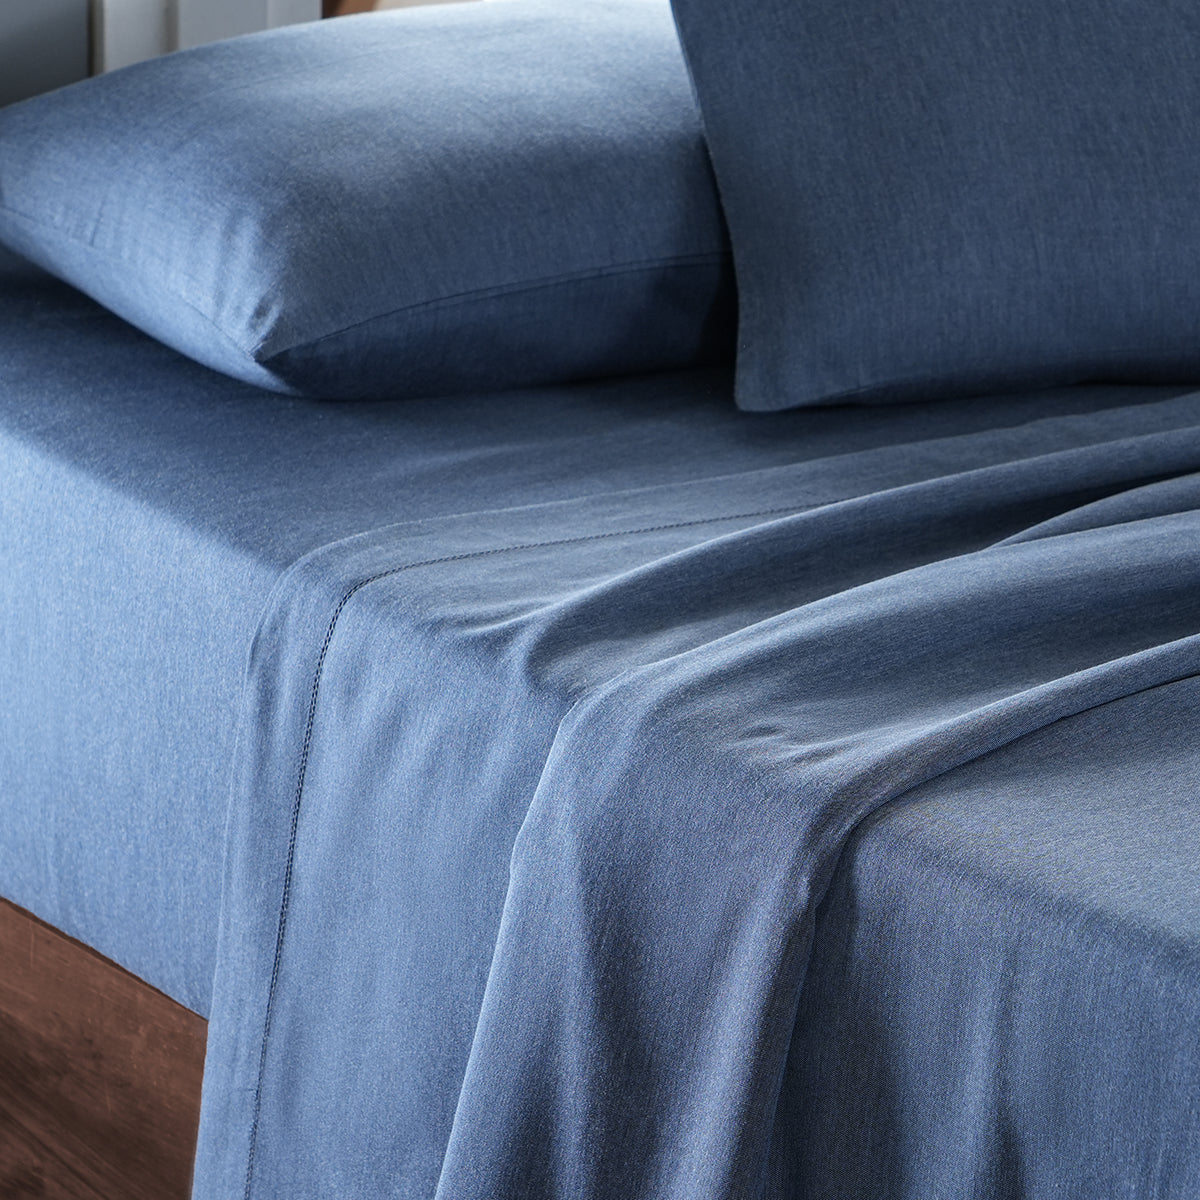 Emmie Made With Egyptian Cotton Ultra Soft Dark Blue Bed Sheet